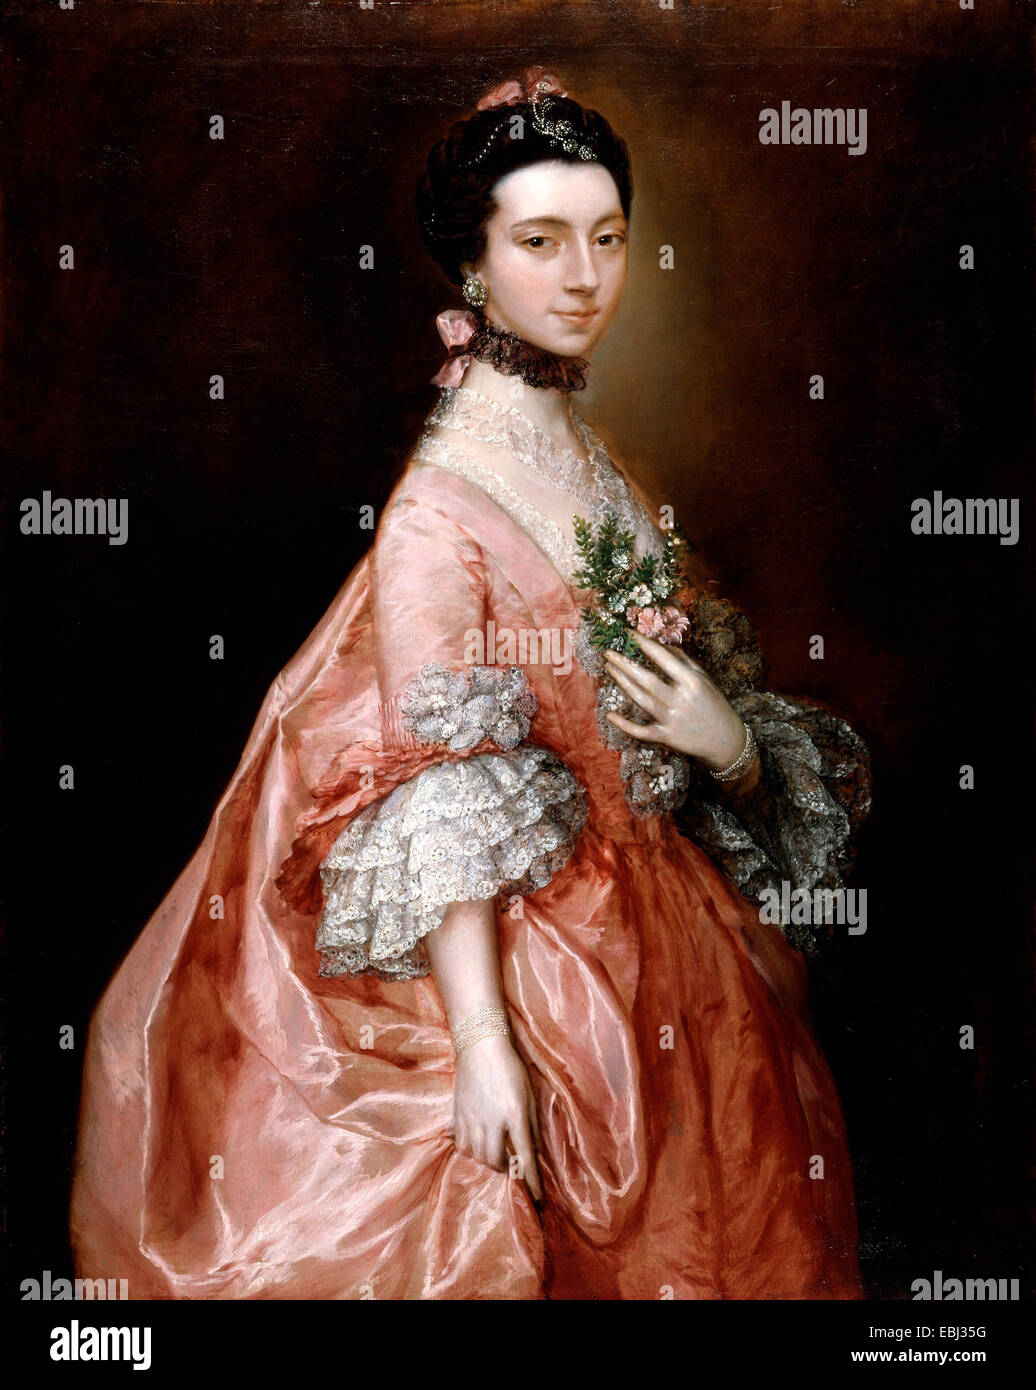 Thomas Gainsborough, Mary Little, Later Lady Carr. Circa 1763. Oil on canvas. Yale Center for British Art, New Haven, USA. Stock Photo